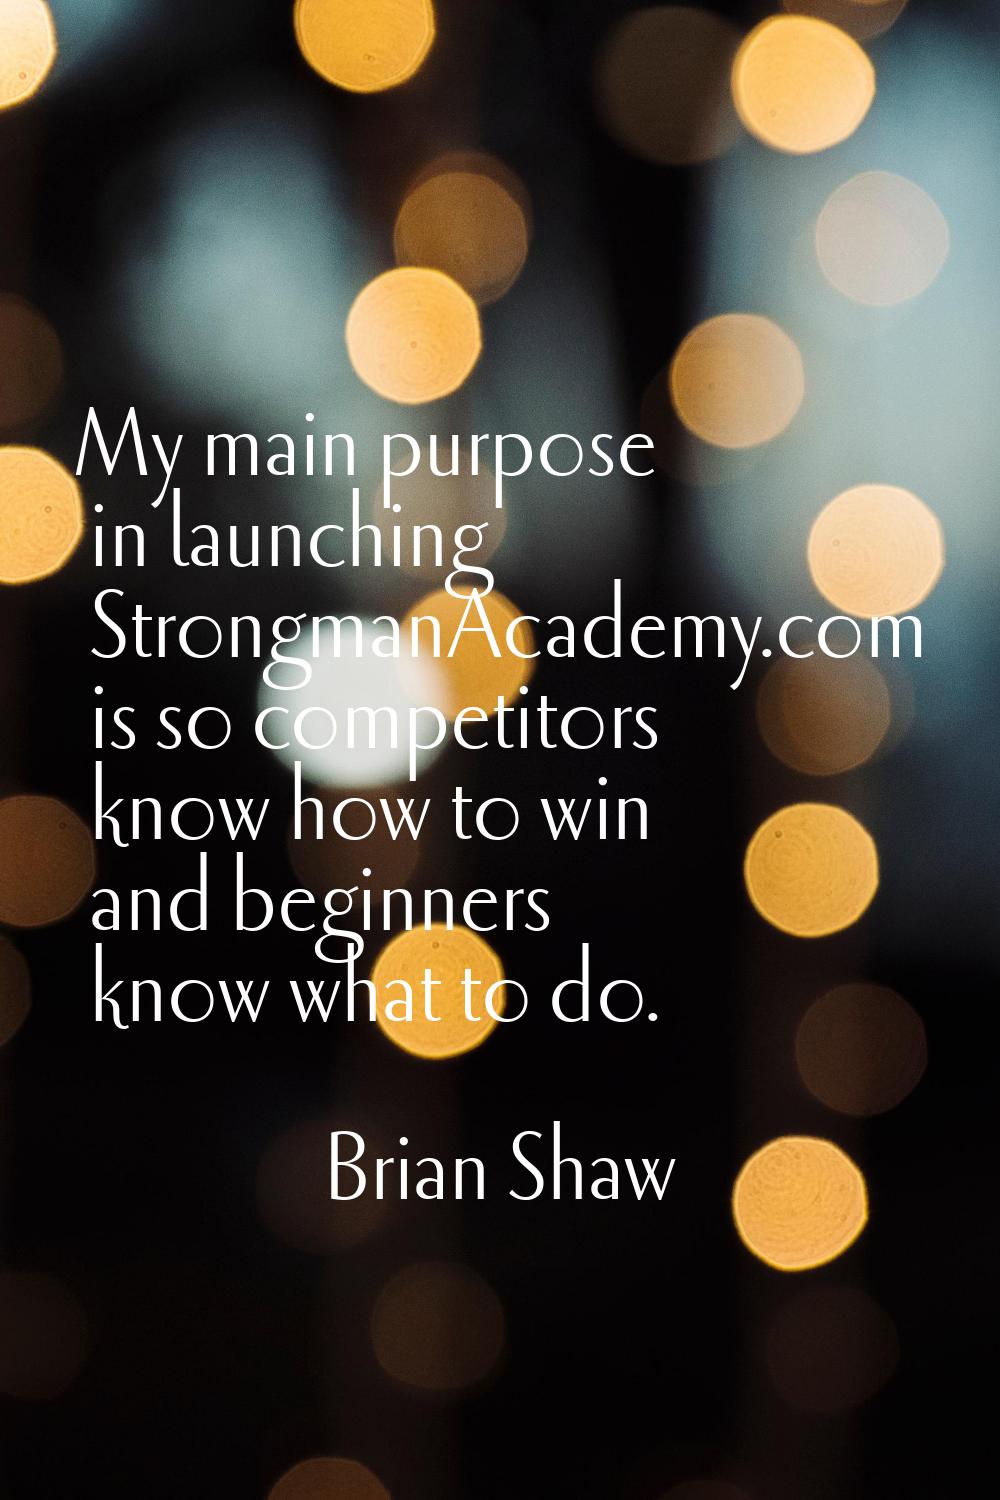 My main purpose in launching StrongmanAcademy.com is so competitors know how to win and beginners k